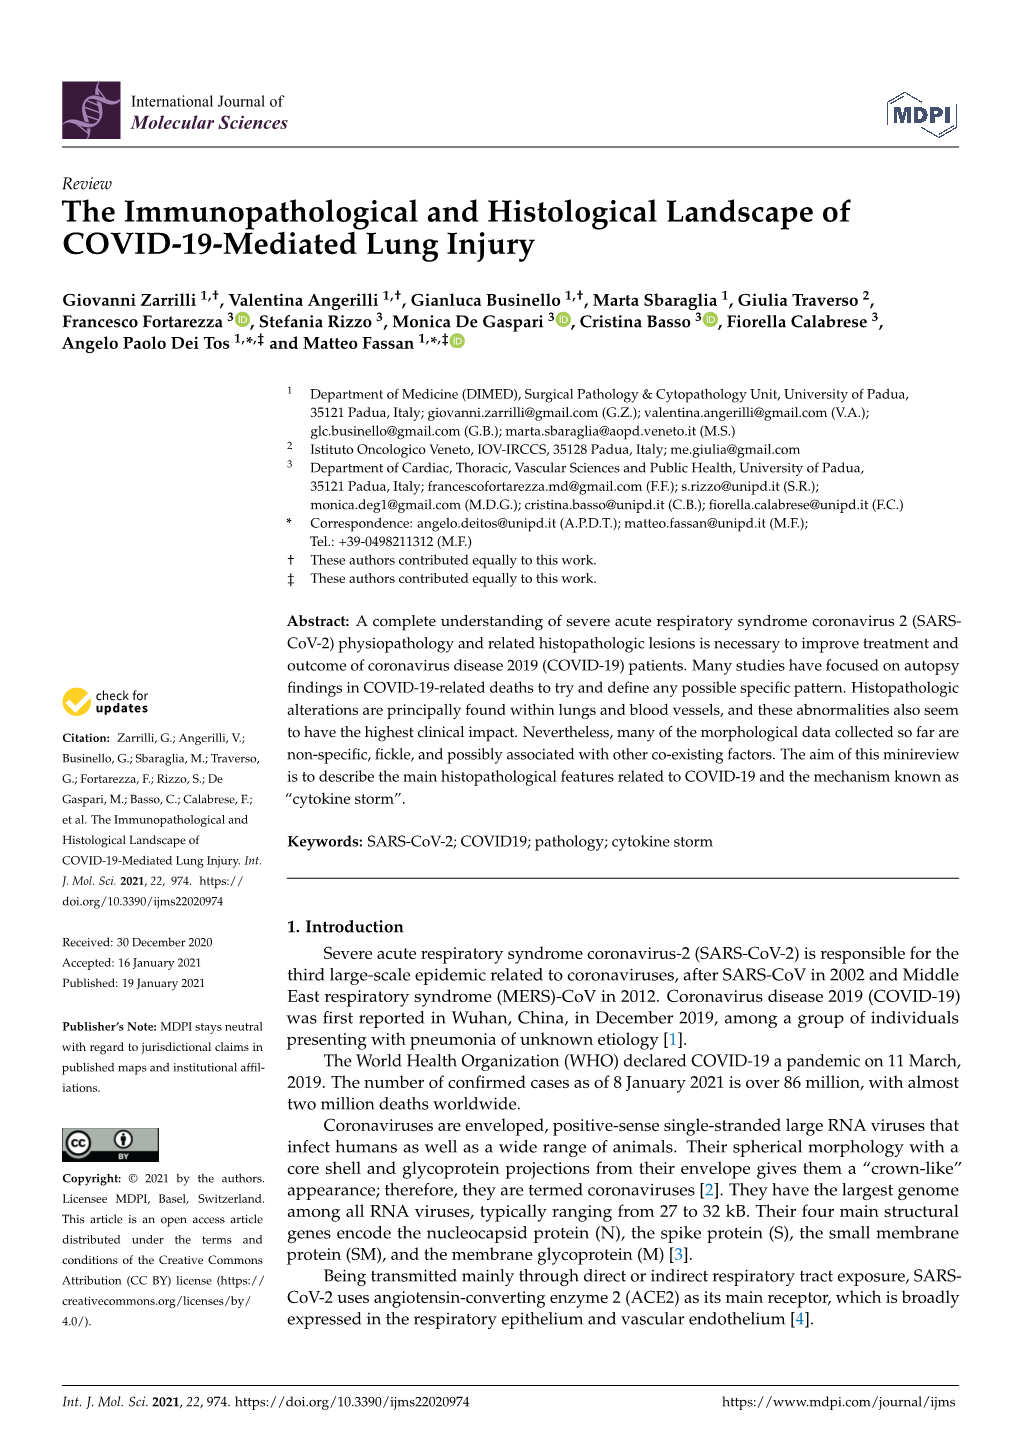 The Immunopathological and Histological Landscape of COVID-19-Mediated Lung Injury